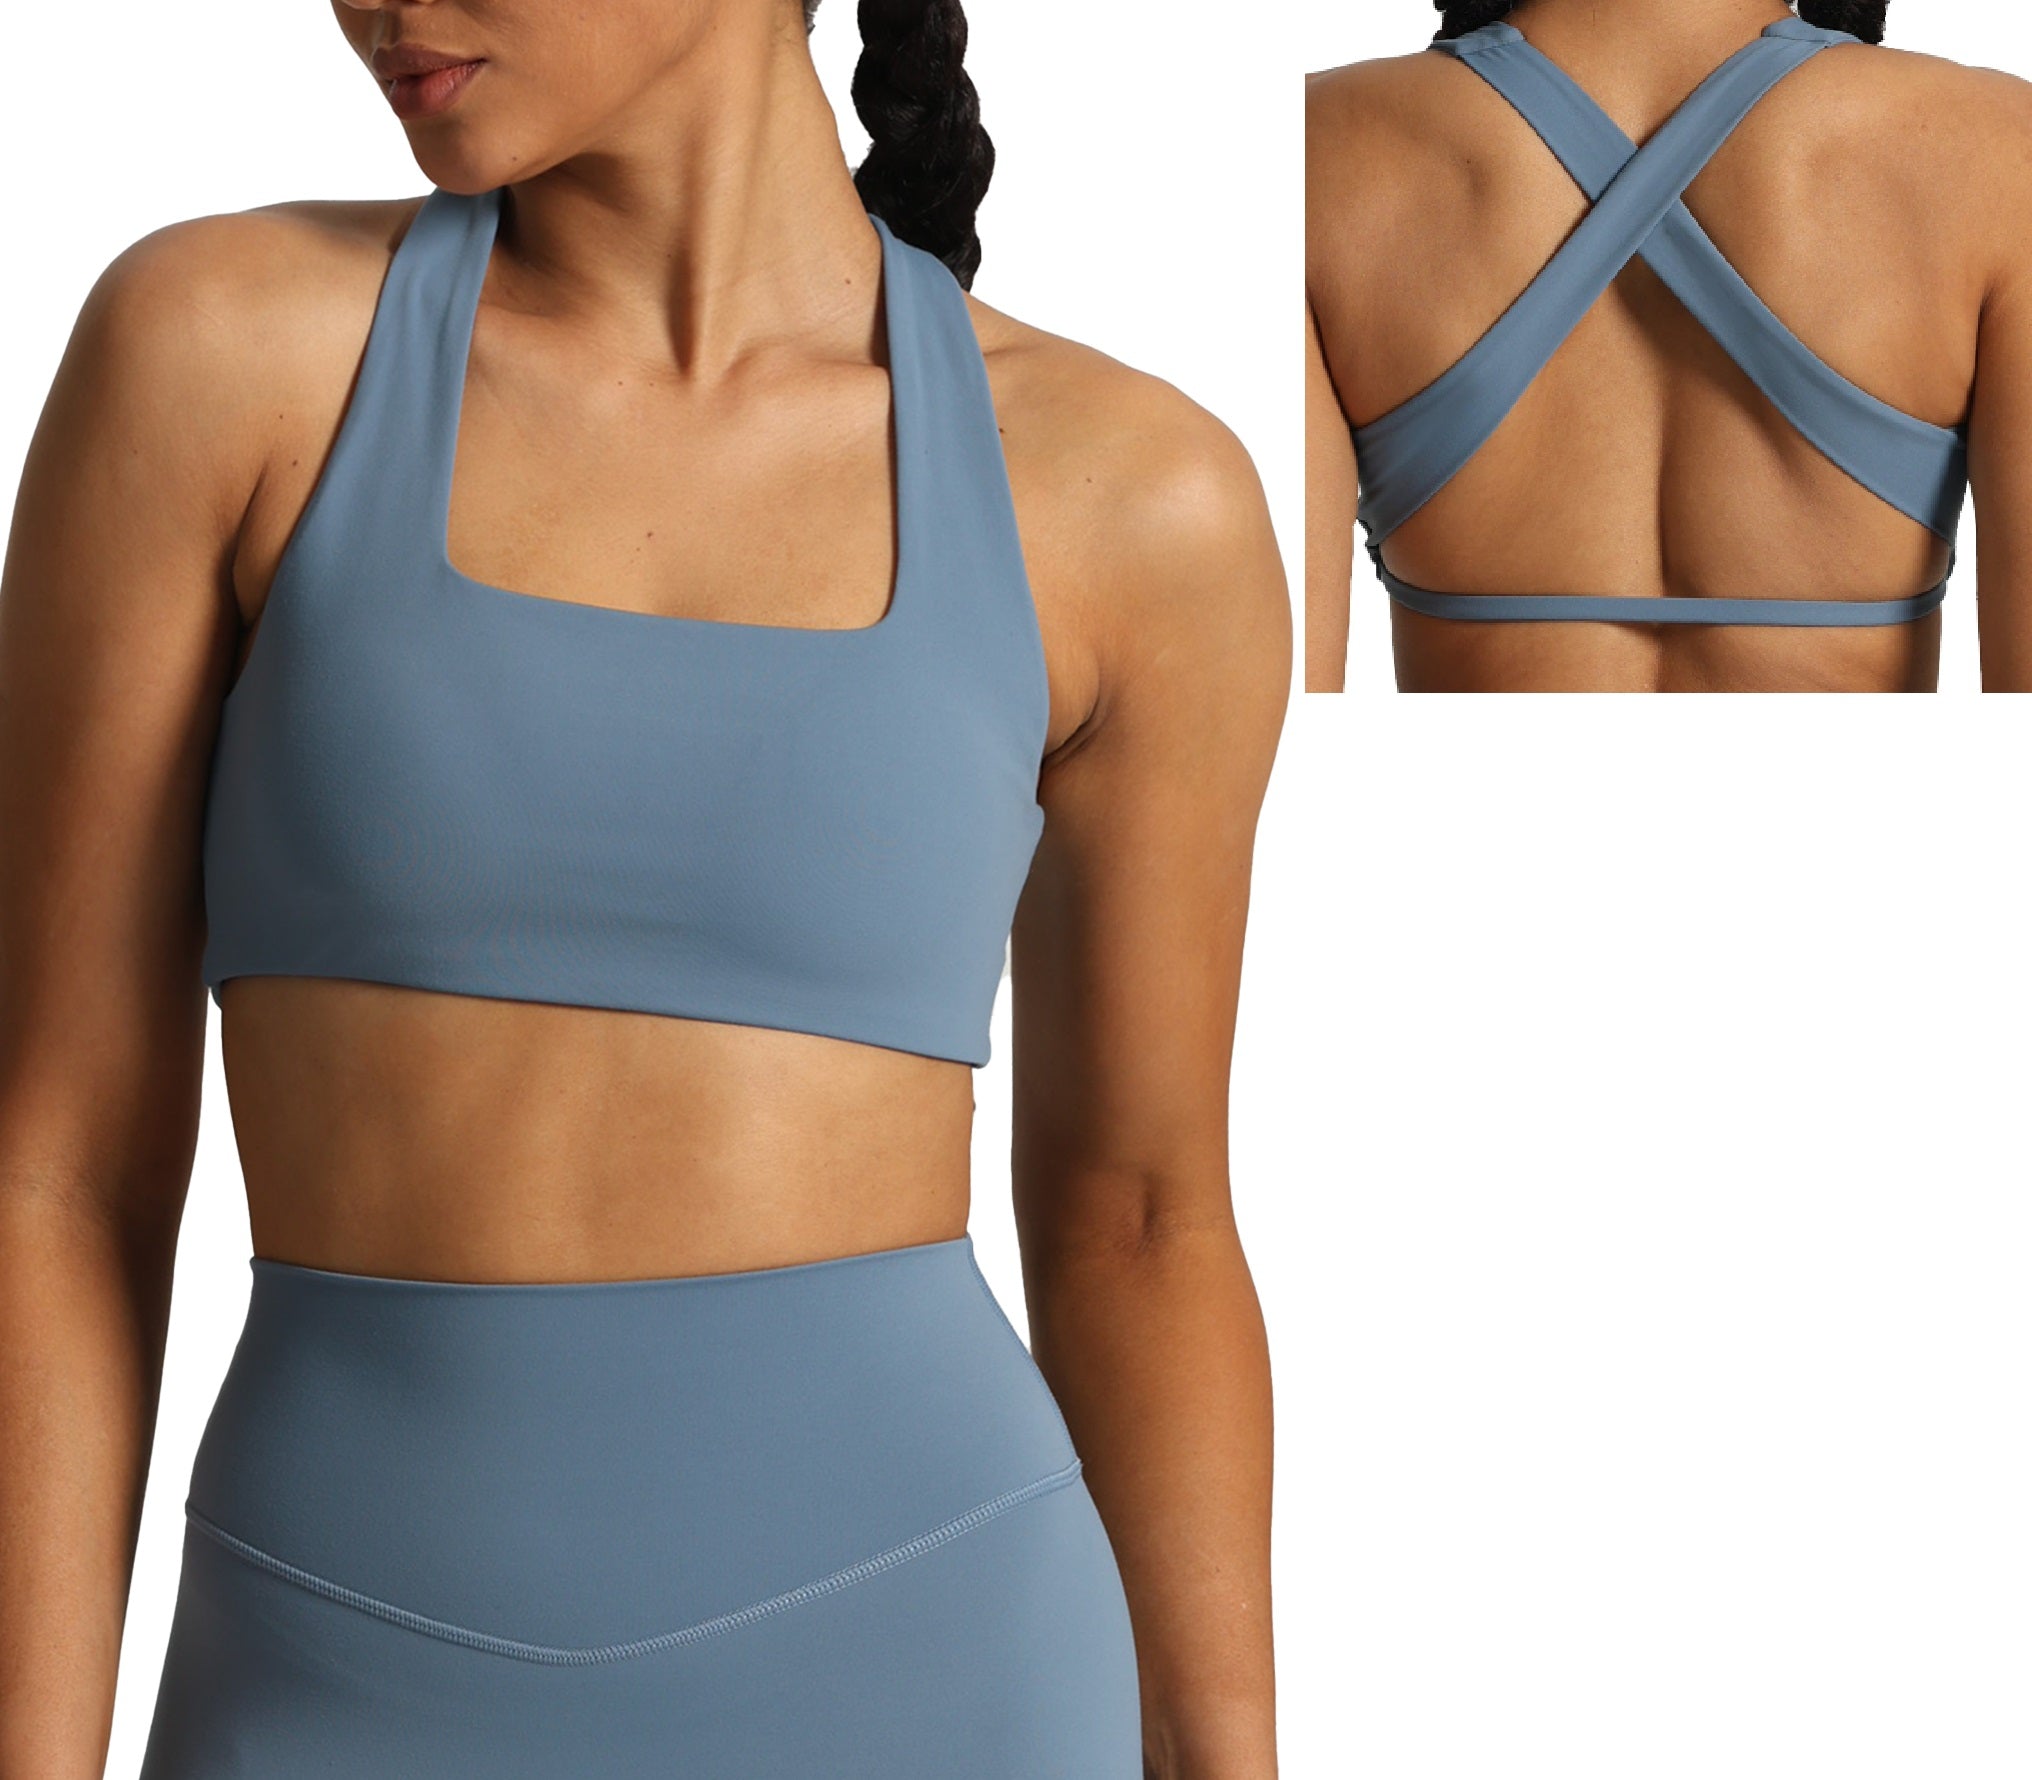 Another amazing Aoxjox bra! #aoxjox #find #activewear